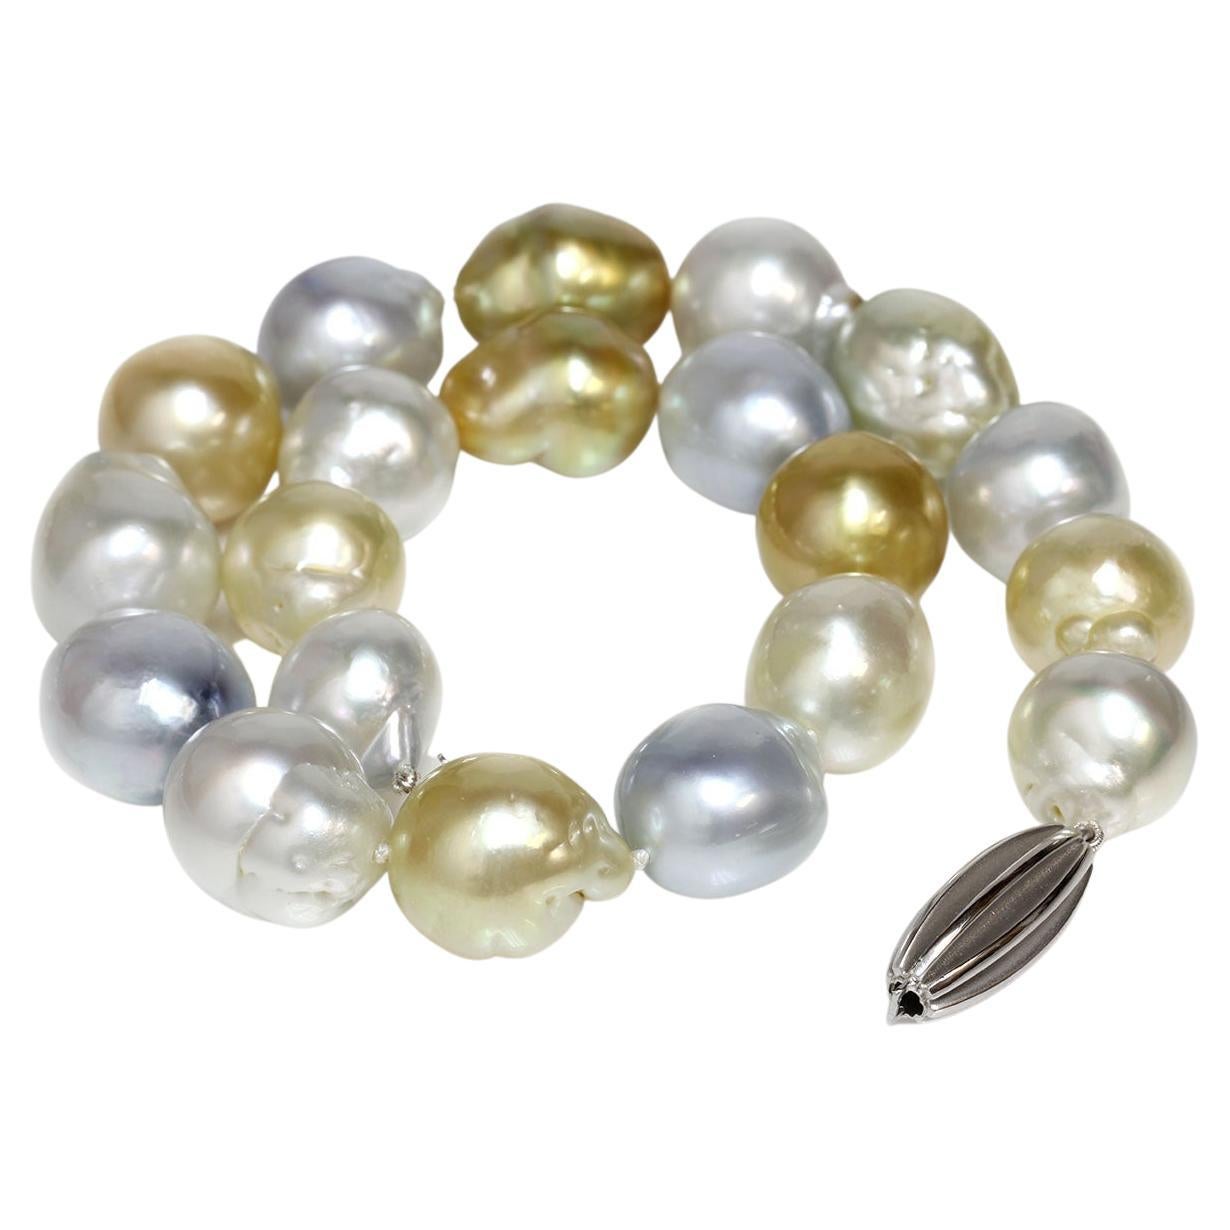 Origin: 	Australia
Pearl Type: South Sea Pearls
Pearl Size: 18.5 - 16.2 MM in Diameter (Necklace)
Loose Pearl Size: 	20.3 x 17.0 - 20.0 x 17.0mm in Diameter
Pearl Color: 	Natural Golden, White, Blue, Deep Golden and Champagne 
Pearl Shape: